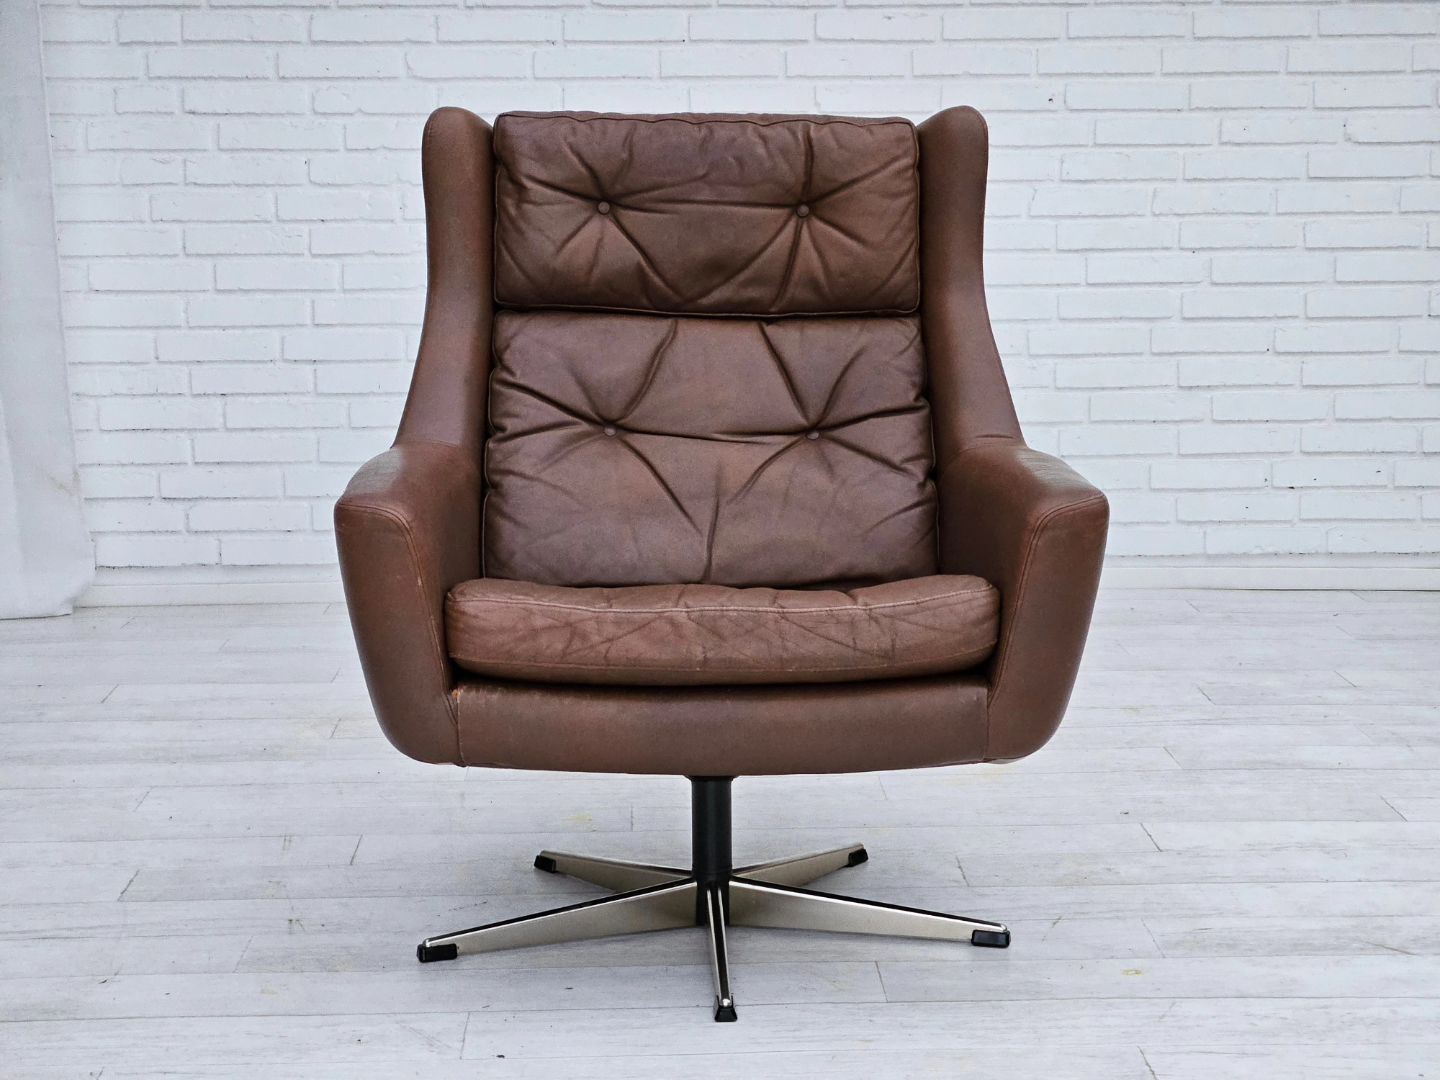 1970s, Danish swivel chair with footstool, original good condition, leather.